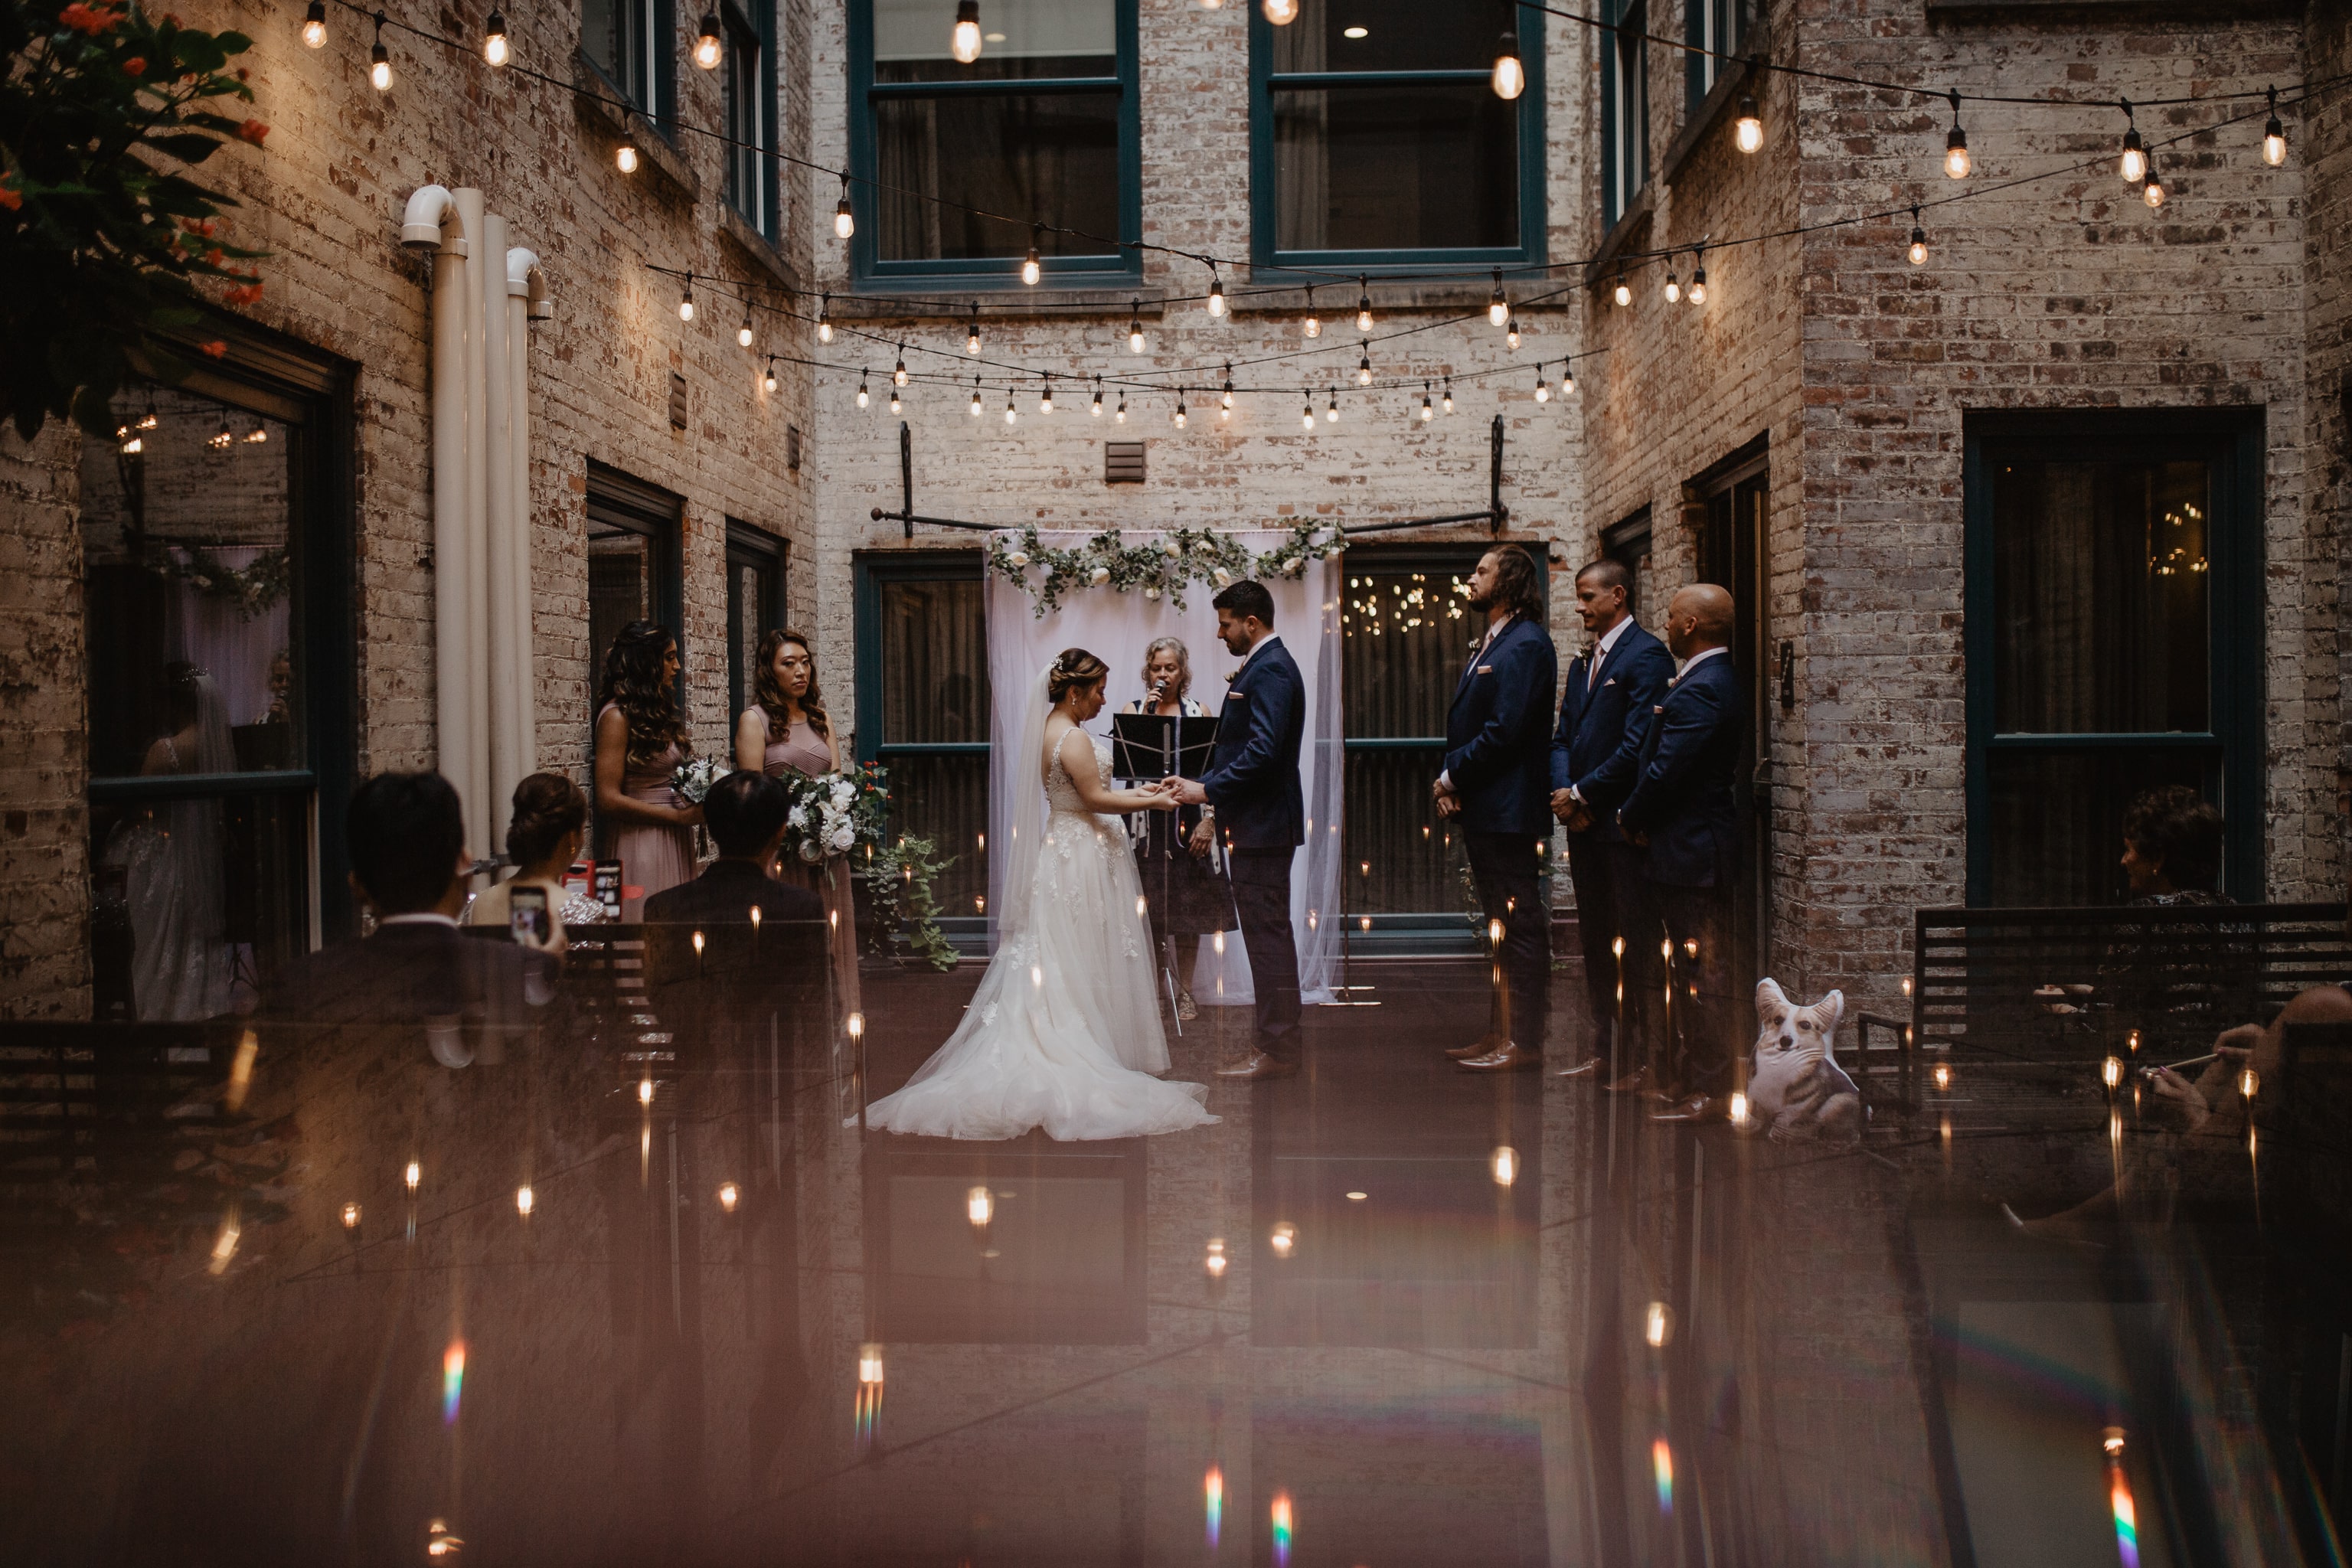 Couple during wedding ceremony in brick courtyard surrounded by twinkling string lights